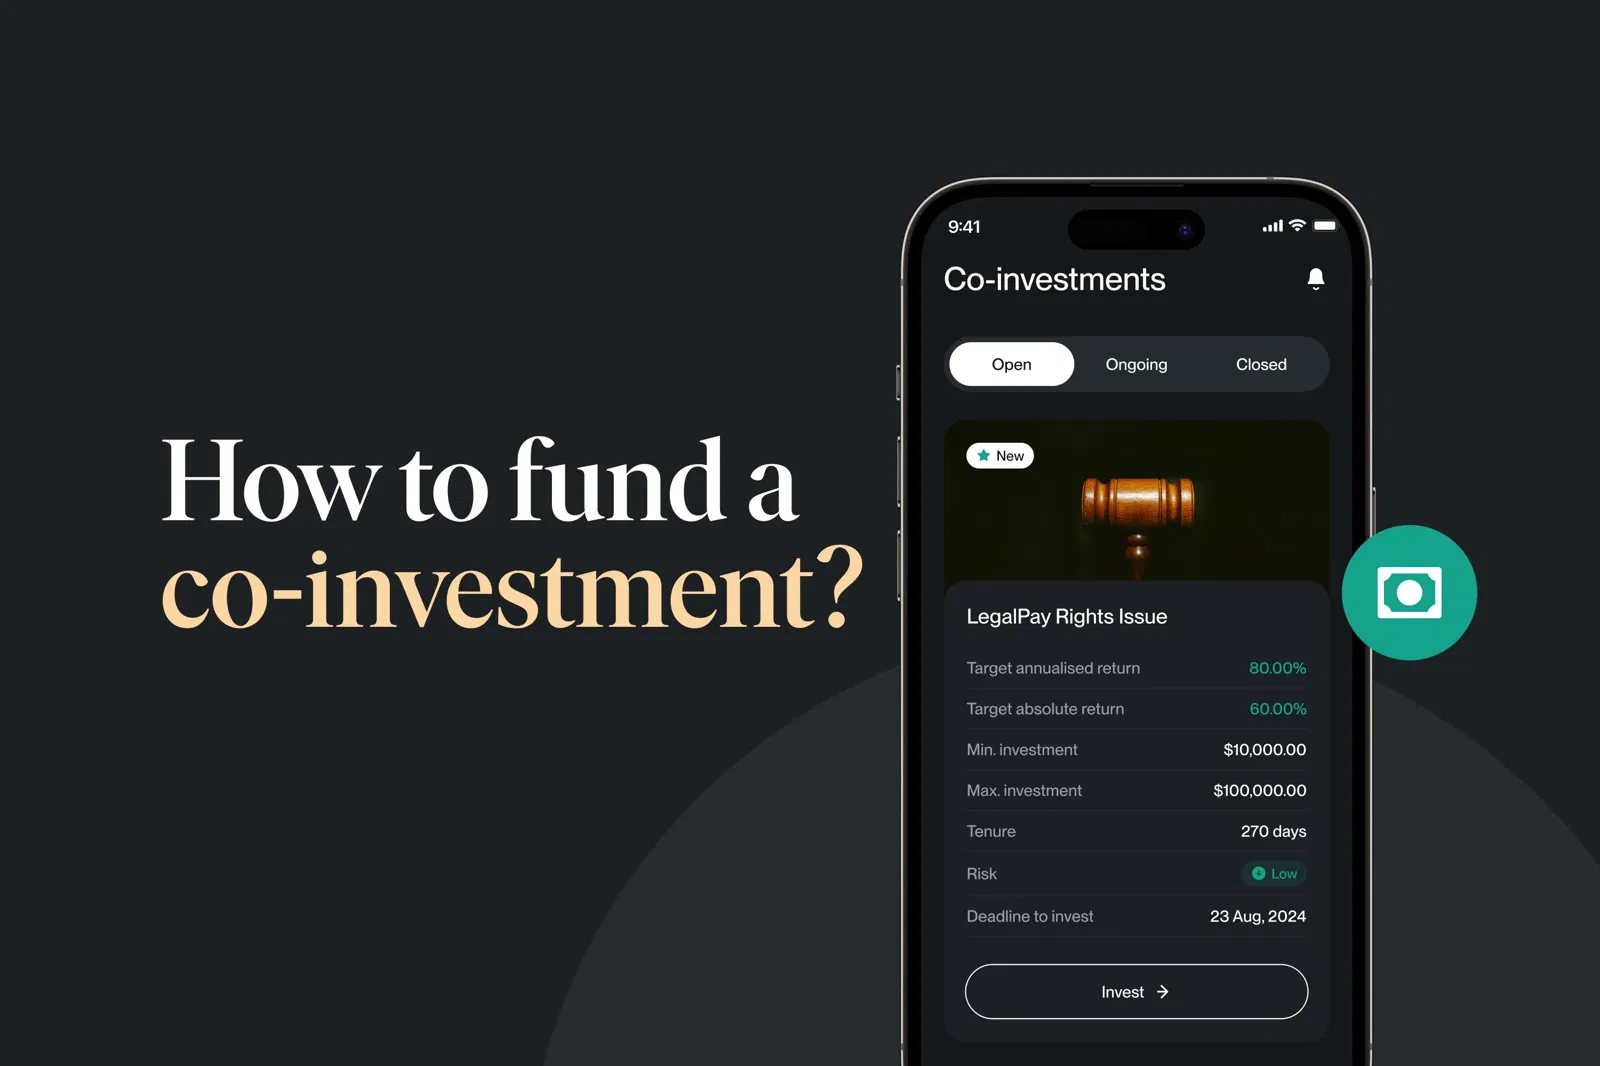 How to fund a co-investment?